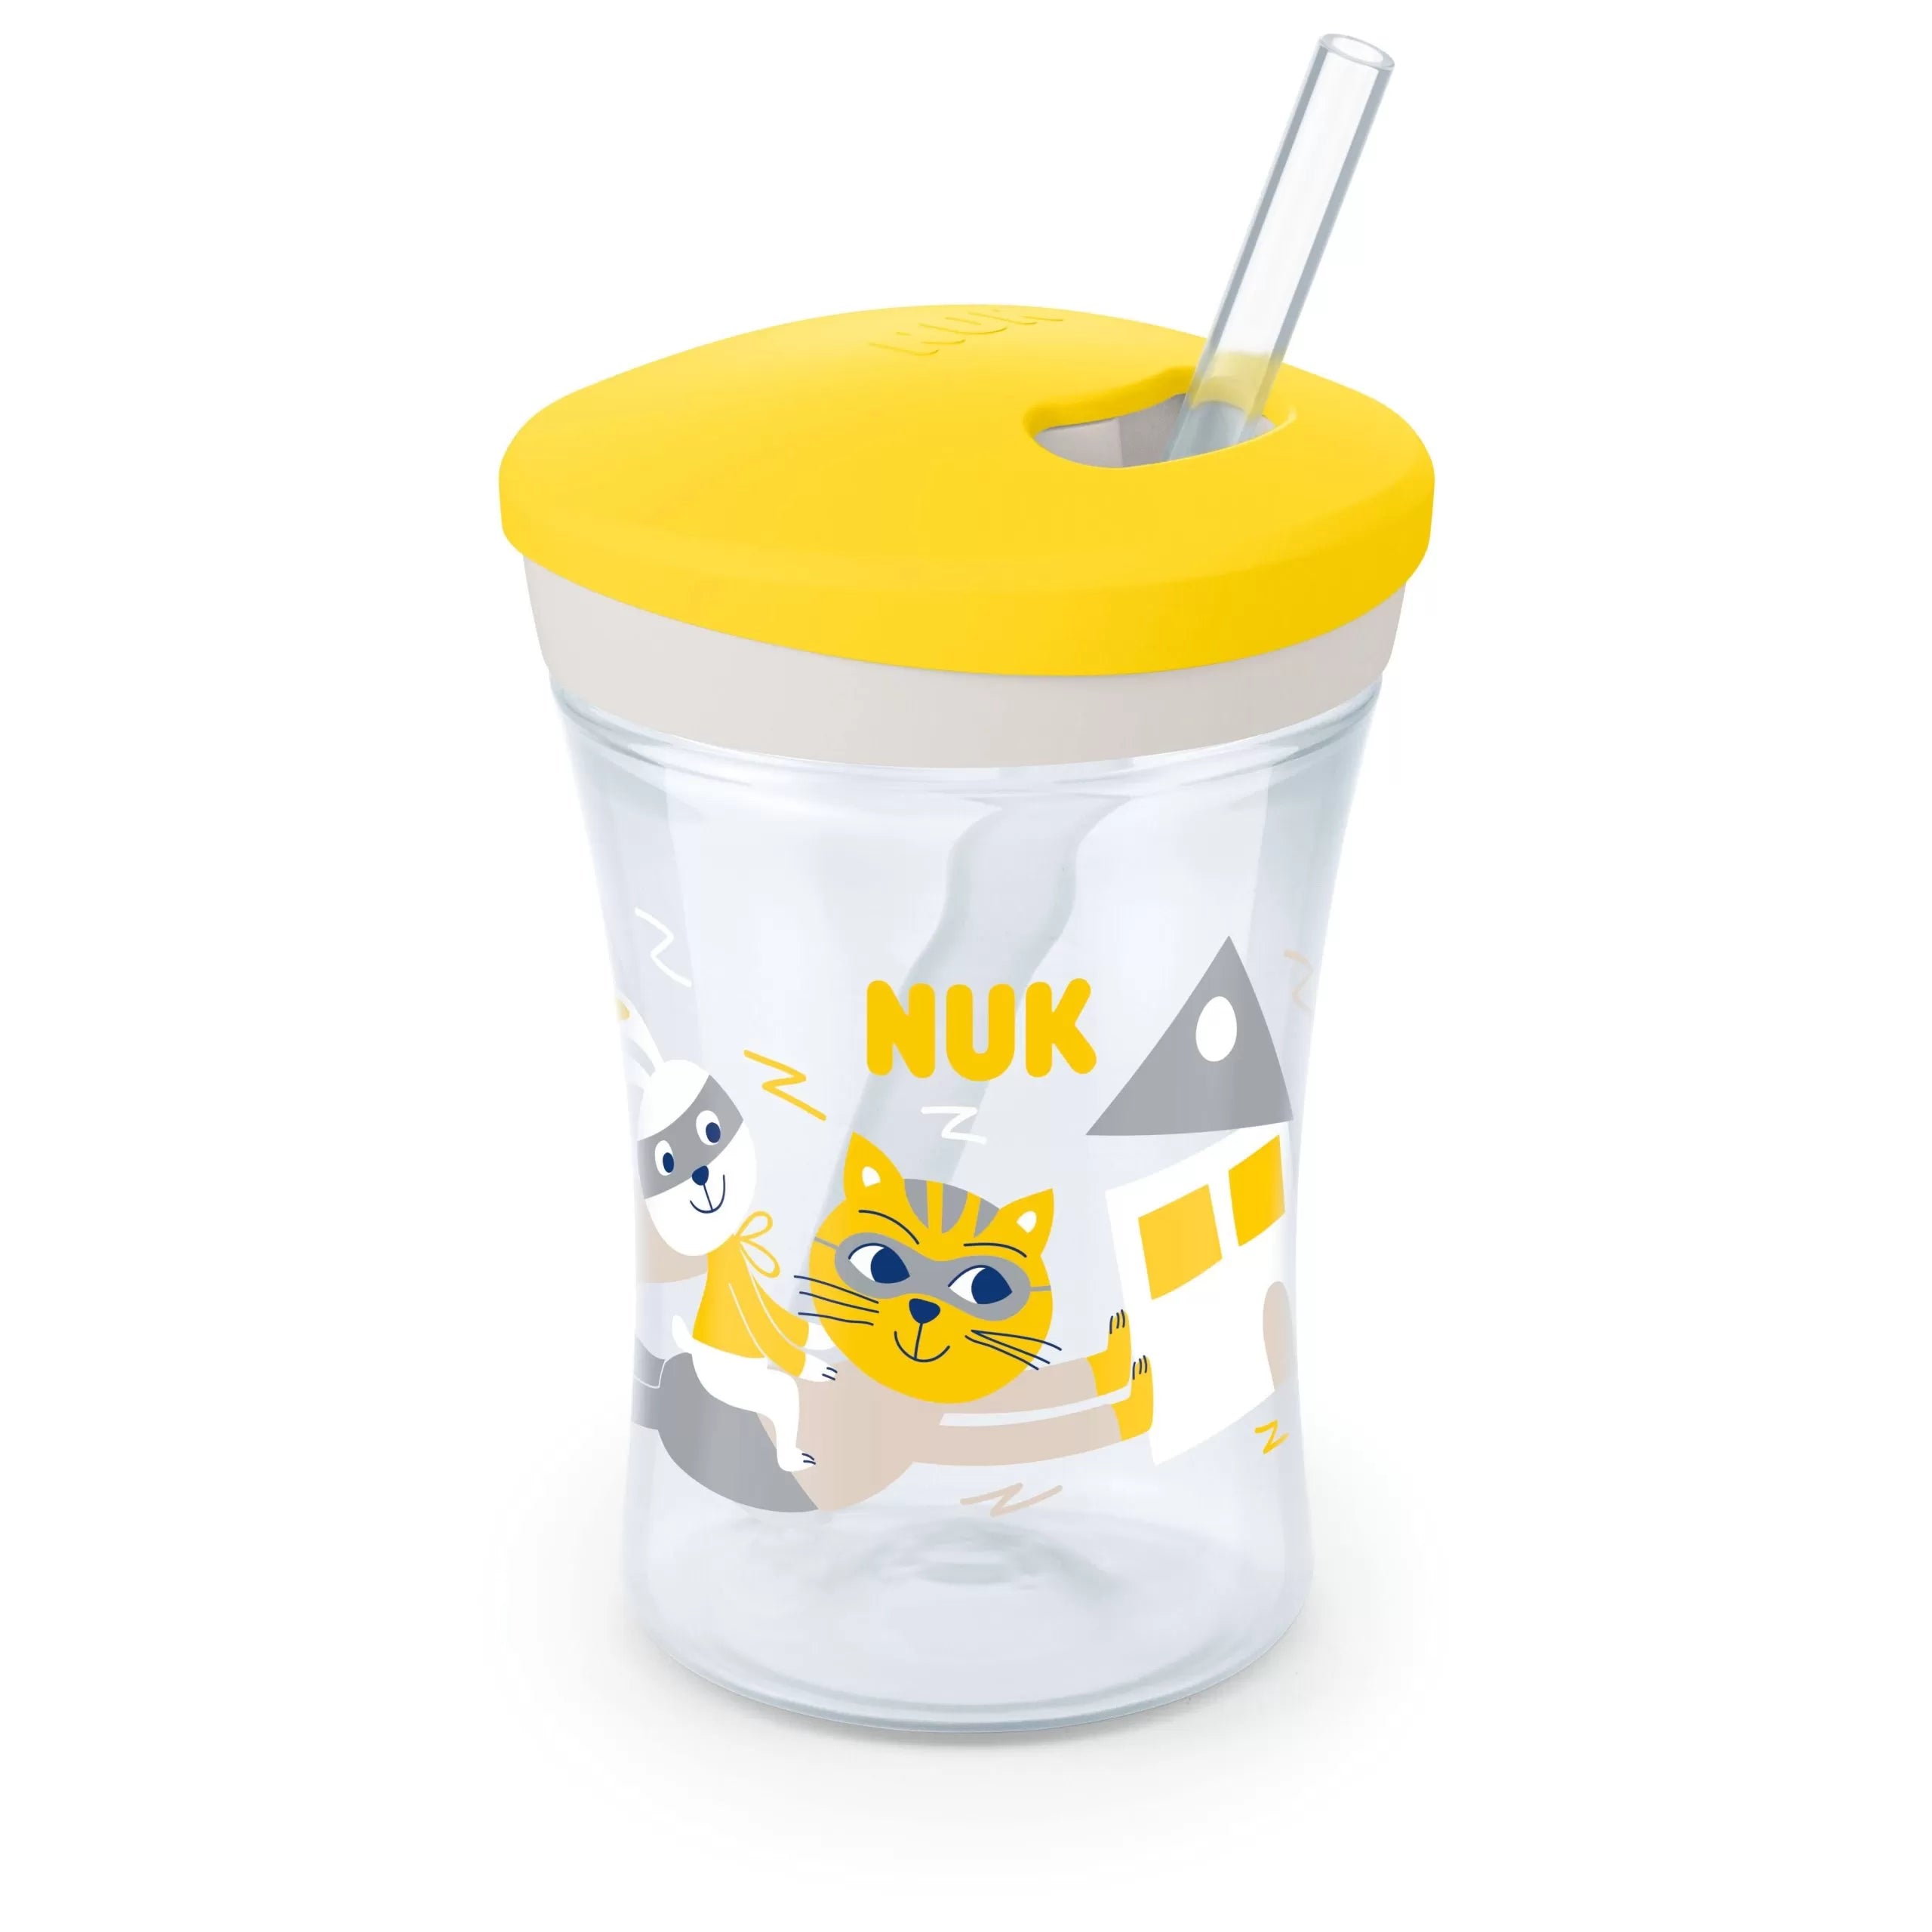 Nuk Action Cup For 12 Months +